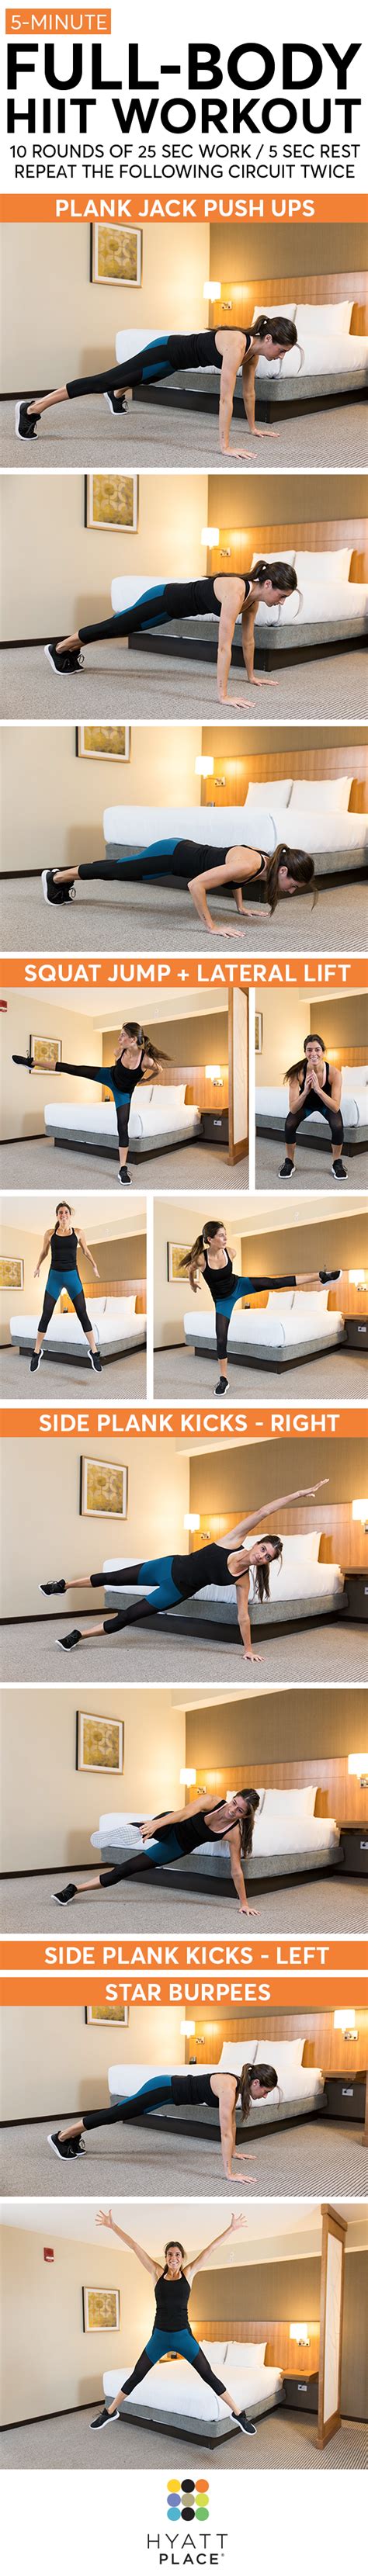 This Full Body Hiit Workout Is Perfect To Do While Traveling No